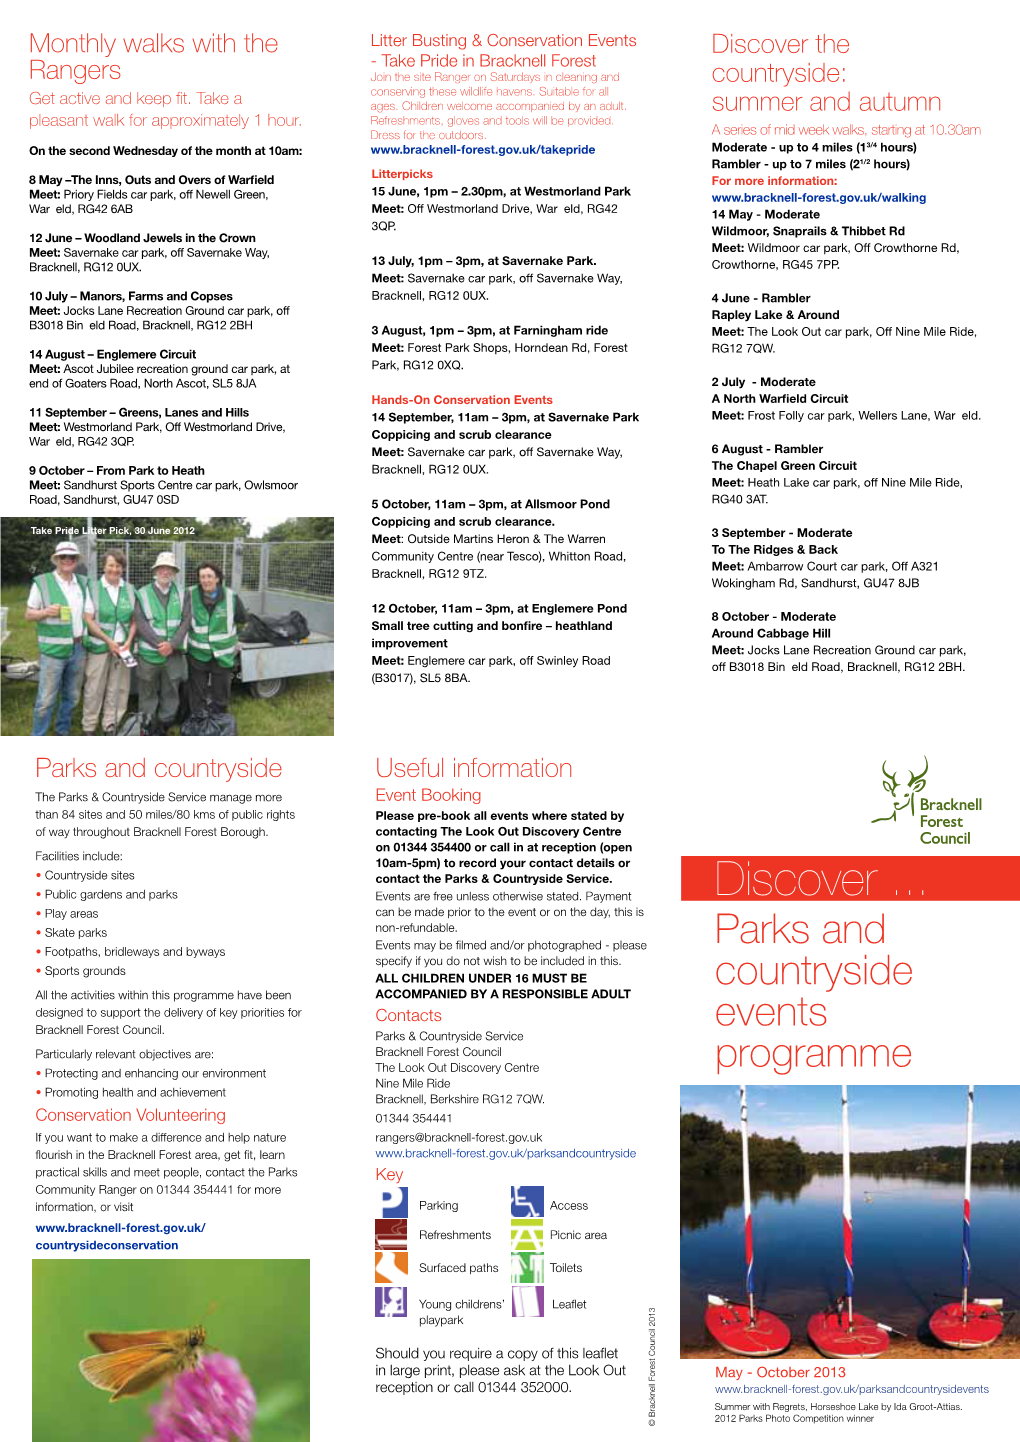 Parks and Countryside Events Programme